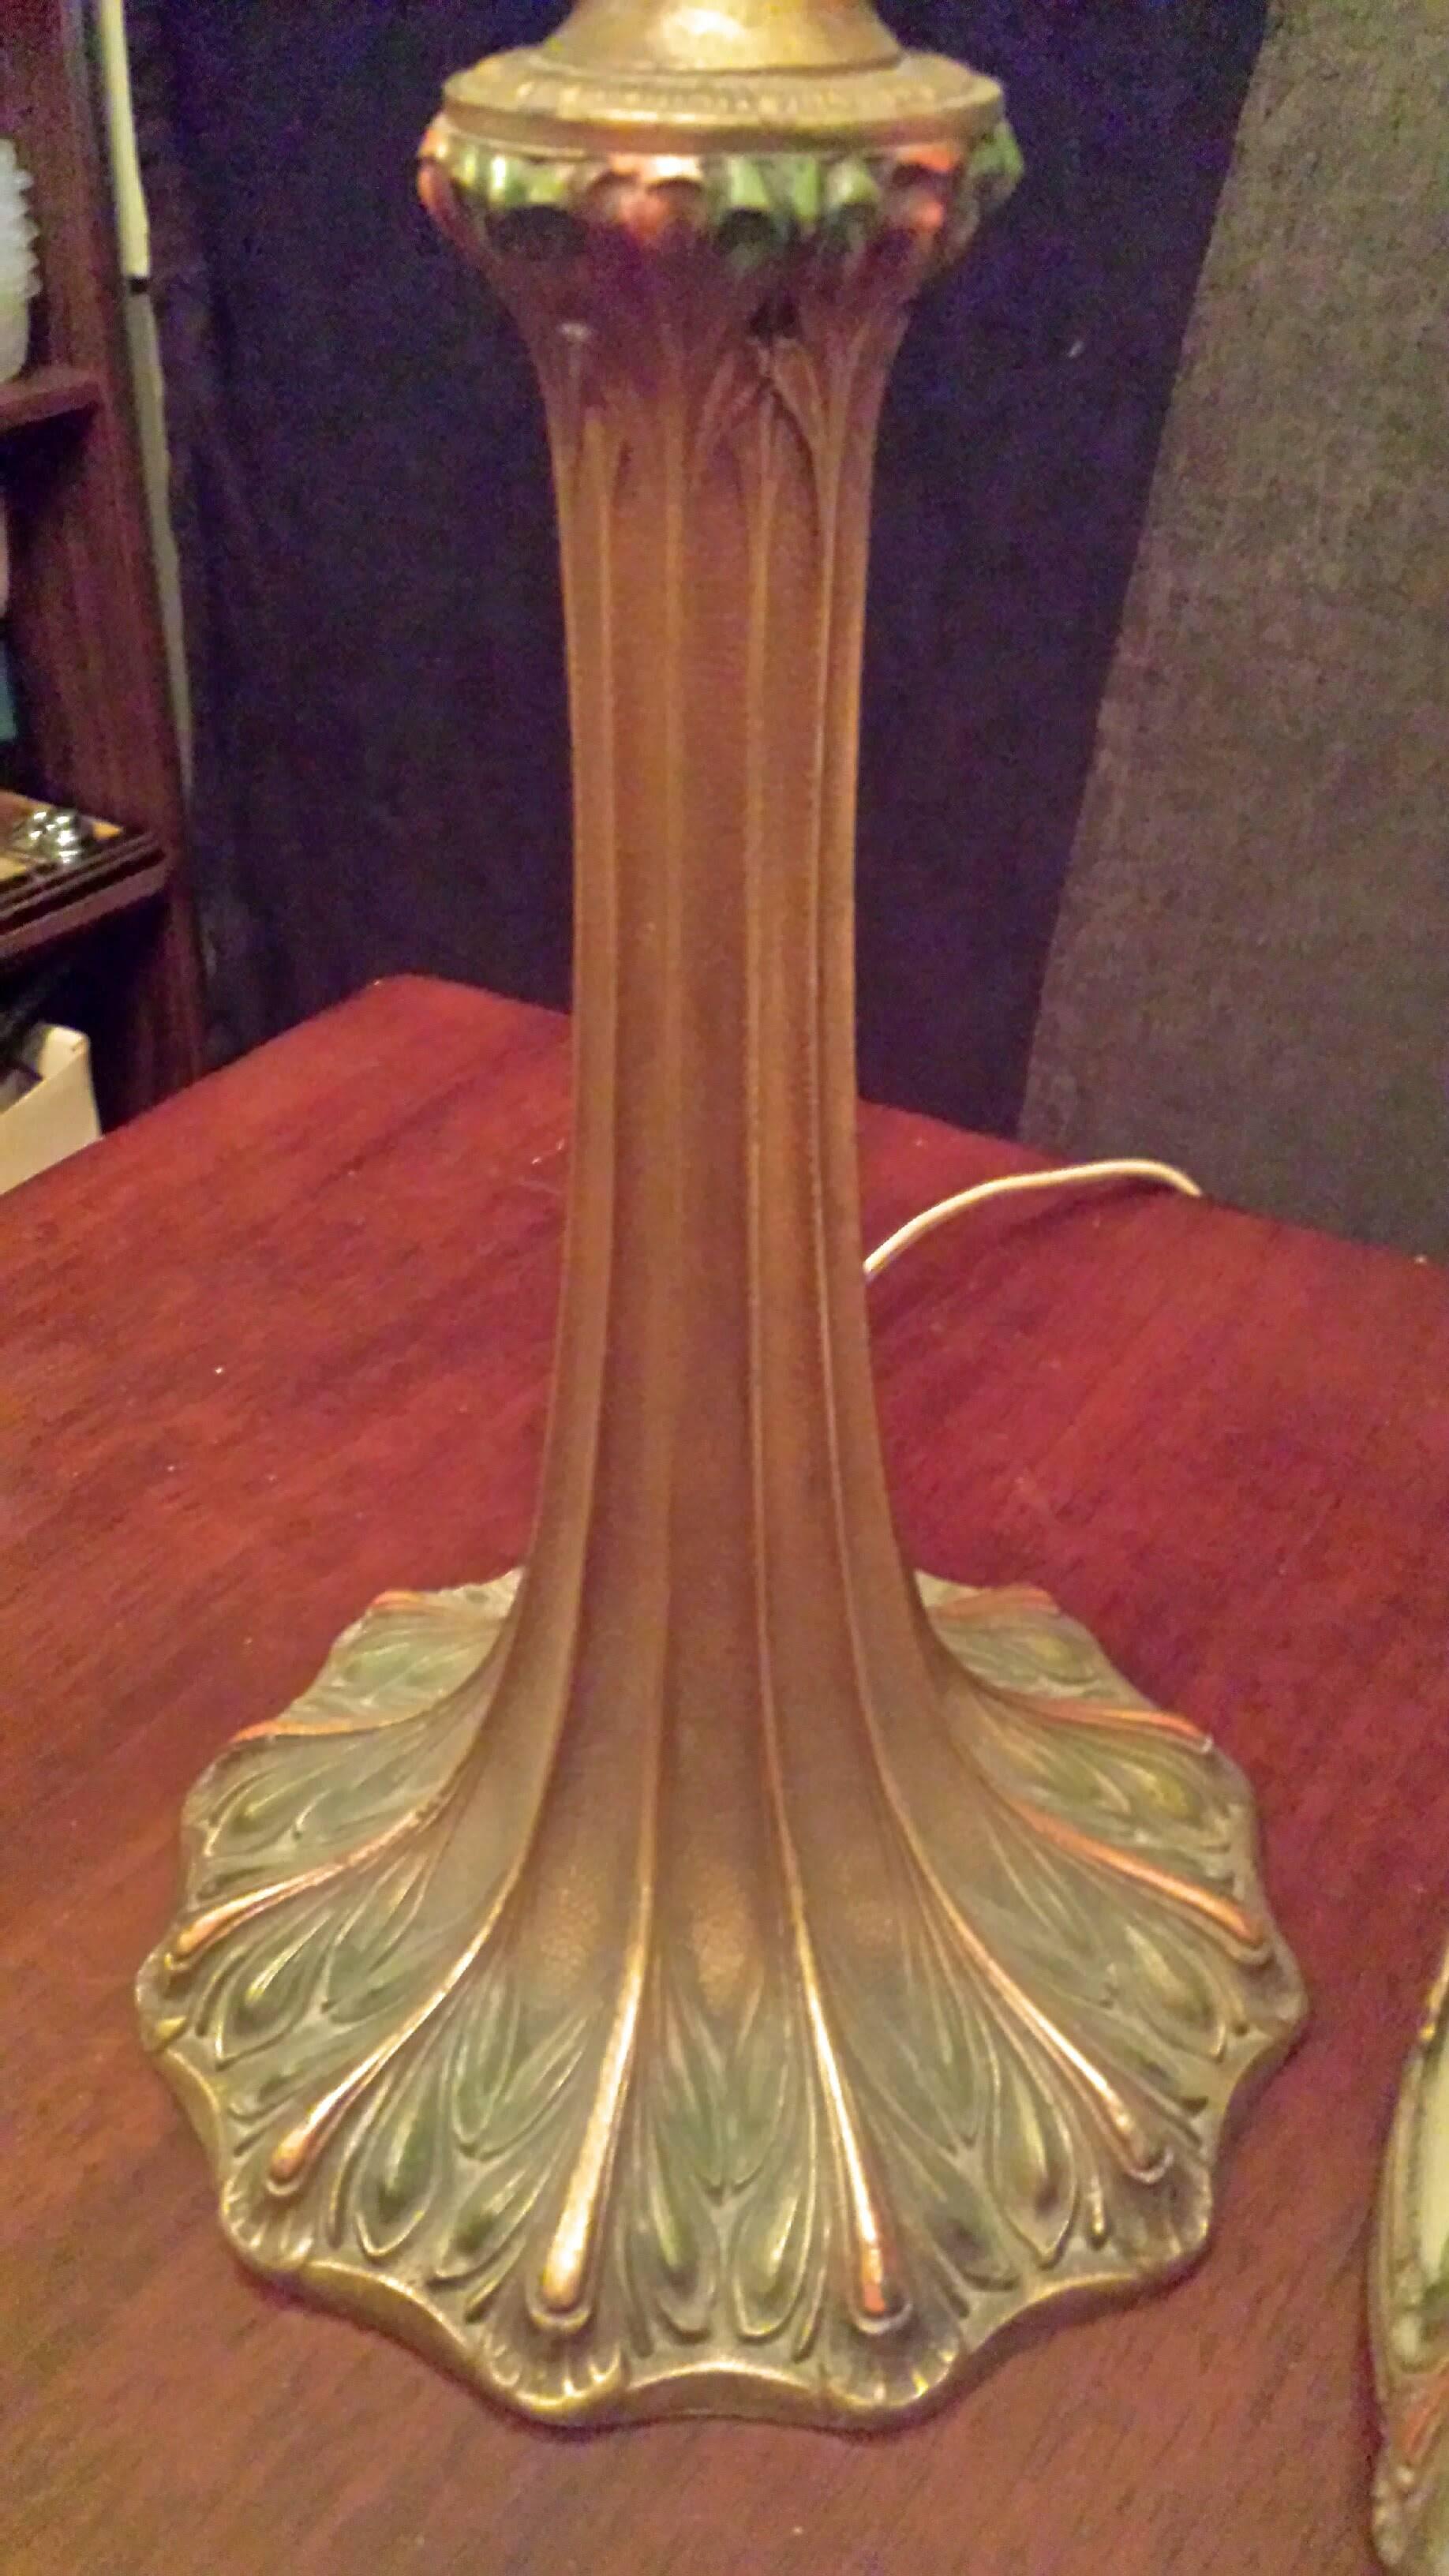 20th Century Slag Glass Table Lamp, Carmel Colored Glass with a Decorated Shade and Base